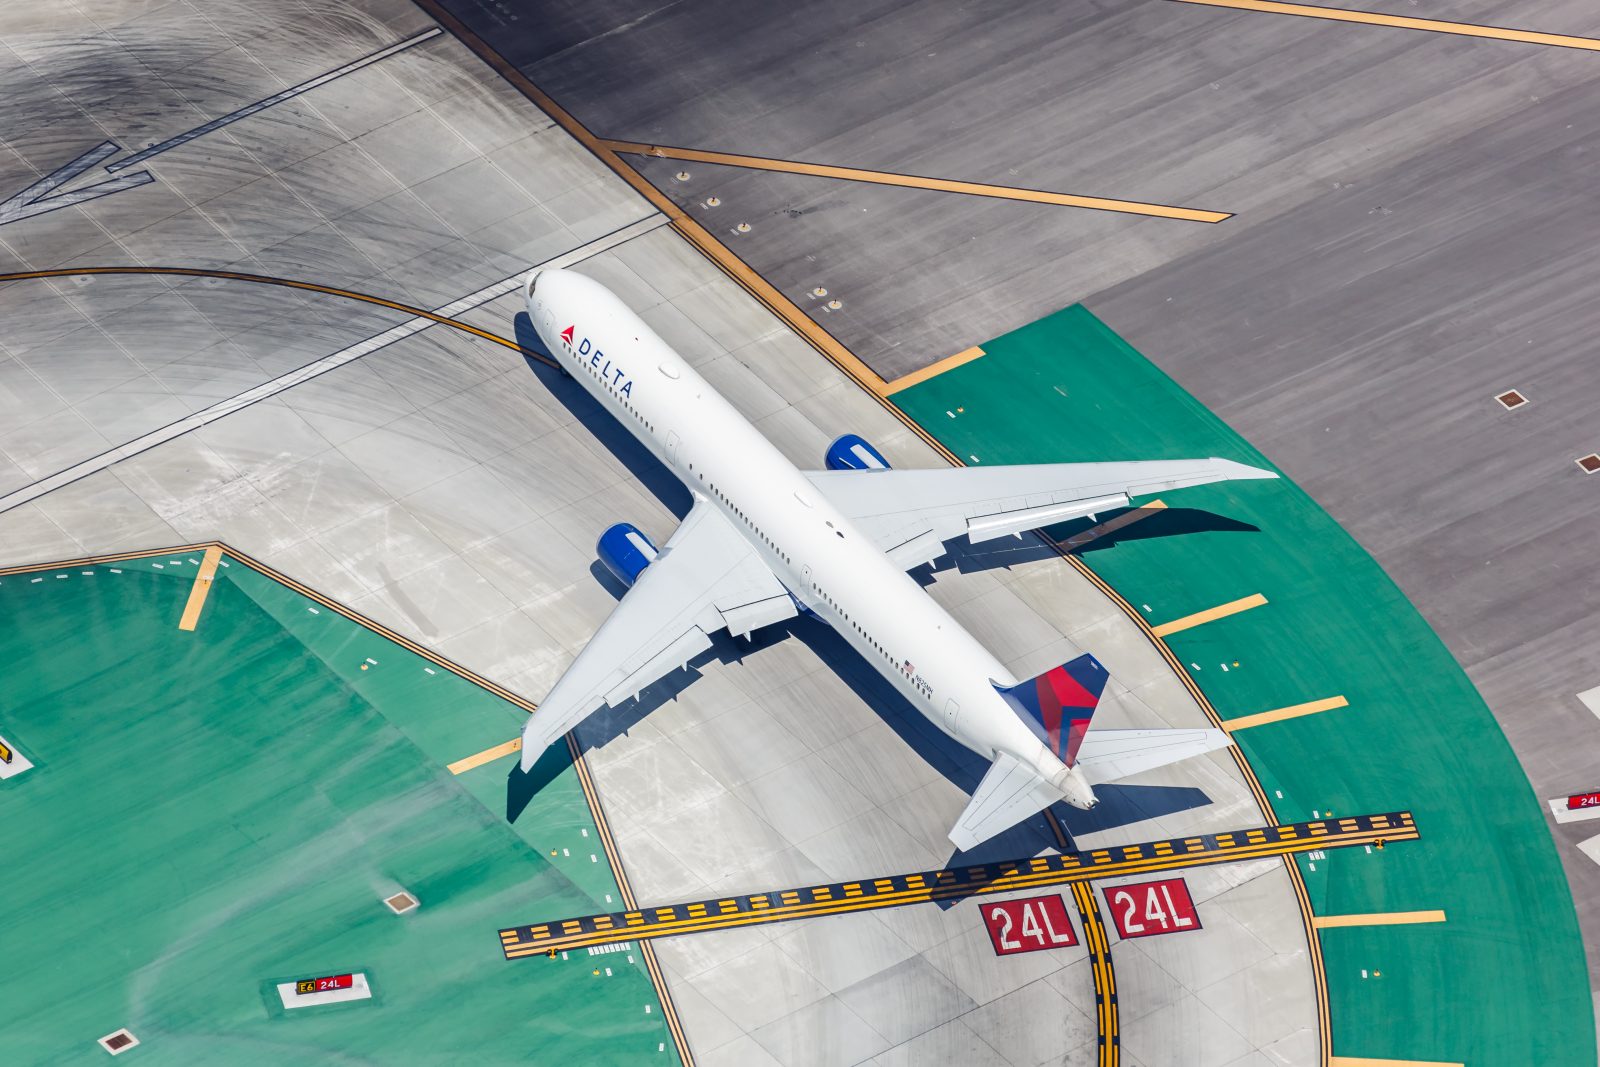 A Delta Air Lines aircraft, seen from above, taxis on the tarmac at Los Angeles International Airport